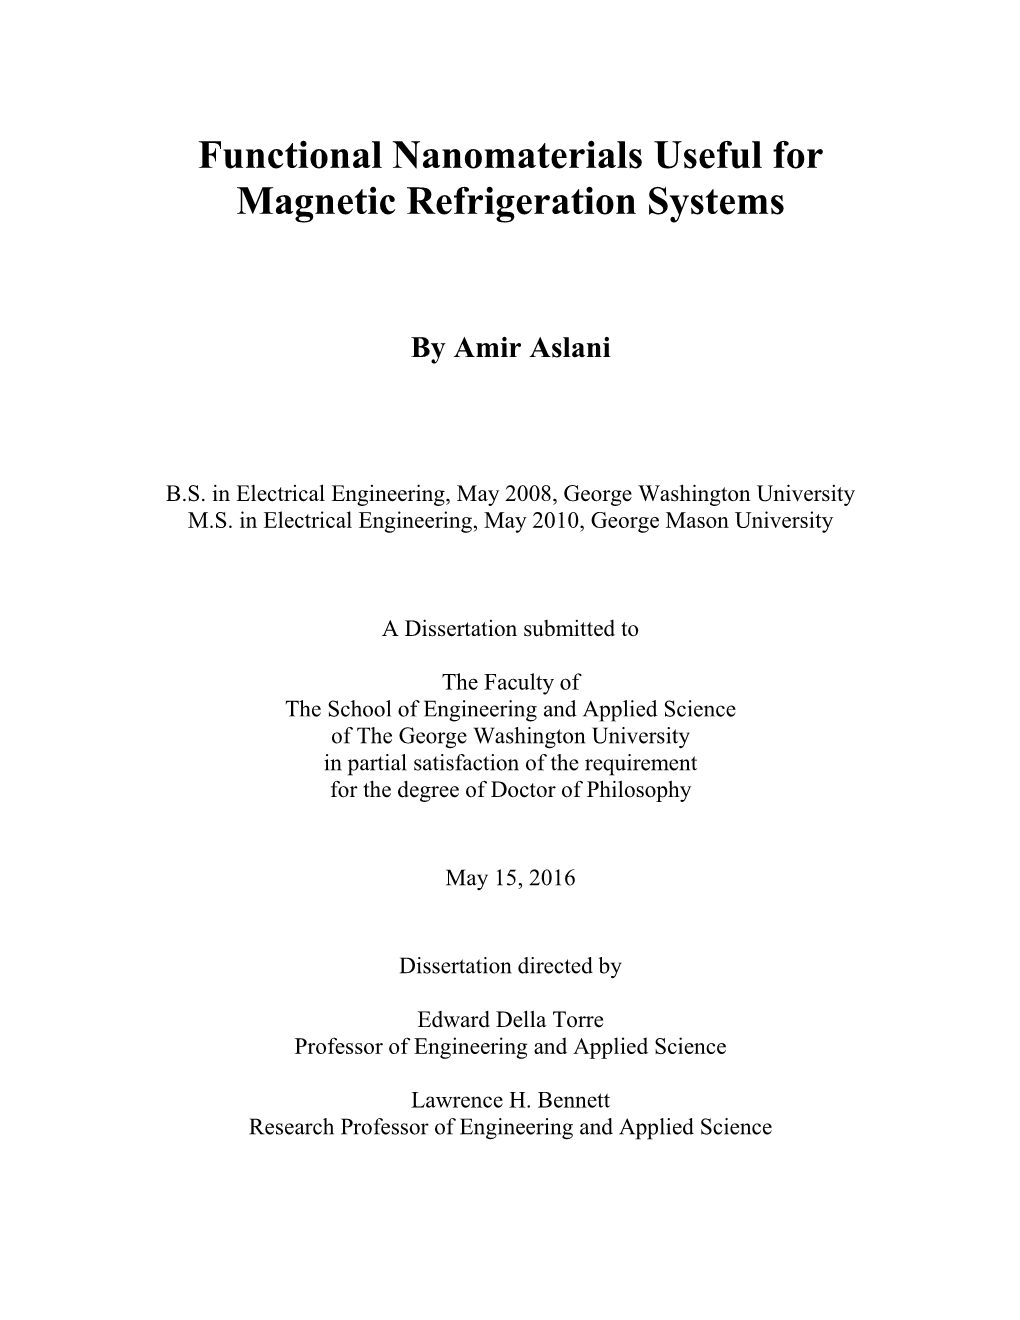 Functional Nanomaterials Useful for Magnetic Refrigeration Systems